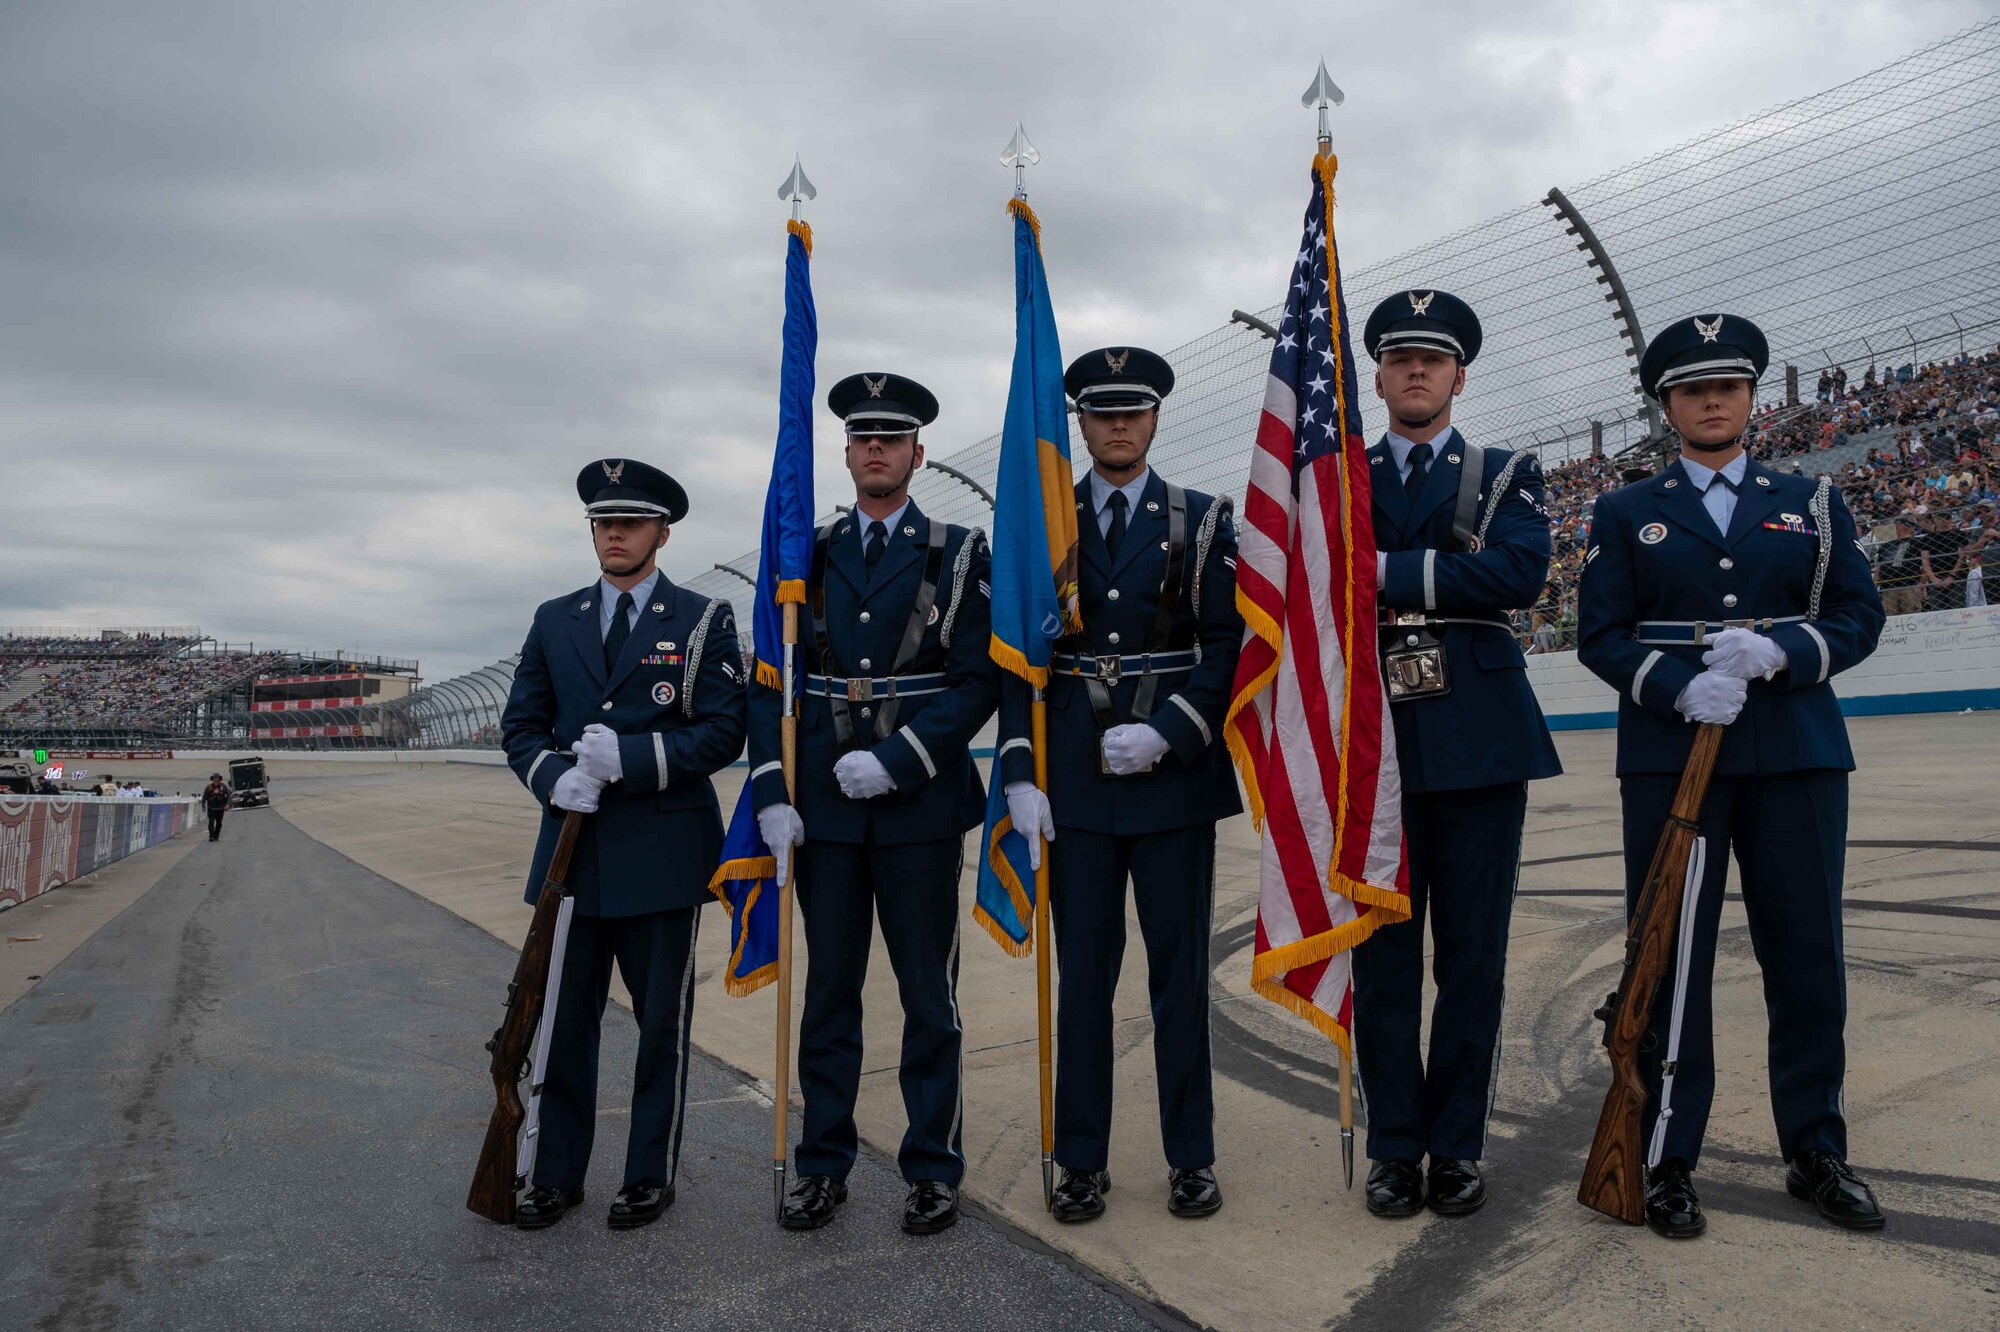 Dover Air Force Base honor guard members wait to present the colors before the Drydene 400 NASCAR race at Dover Motor Speedway in Dover, Delaware, May 1, 2022. The Honor Guard members presented the colors during pre-race events throughout the 2022 NASCAR weekend. (U.S. Air Force photo by Senior Airman Faith Schaefer)